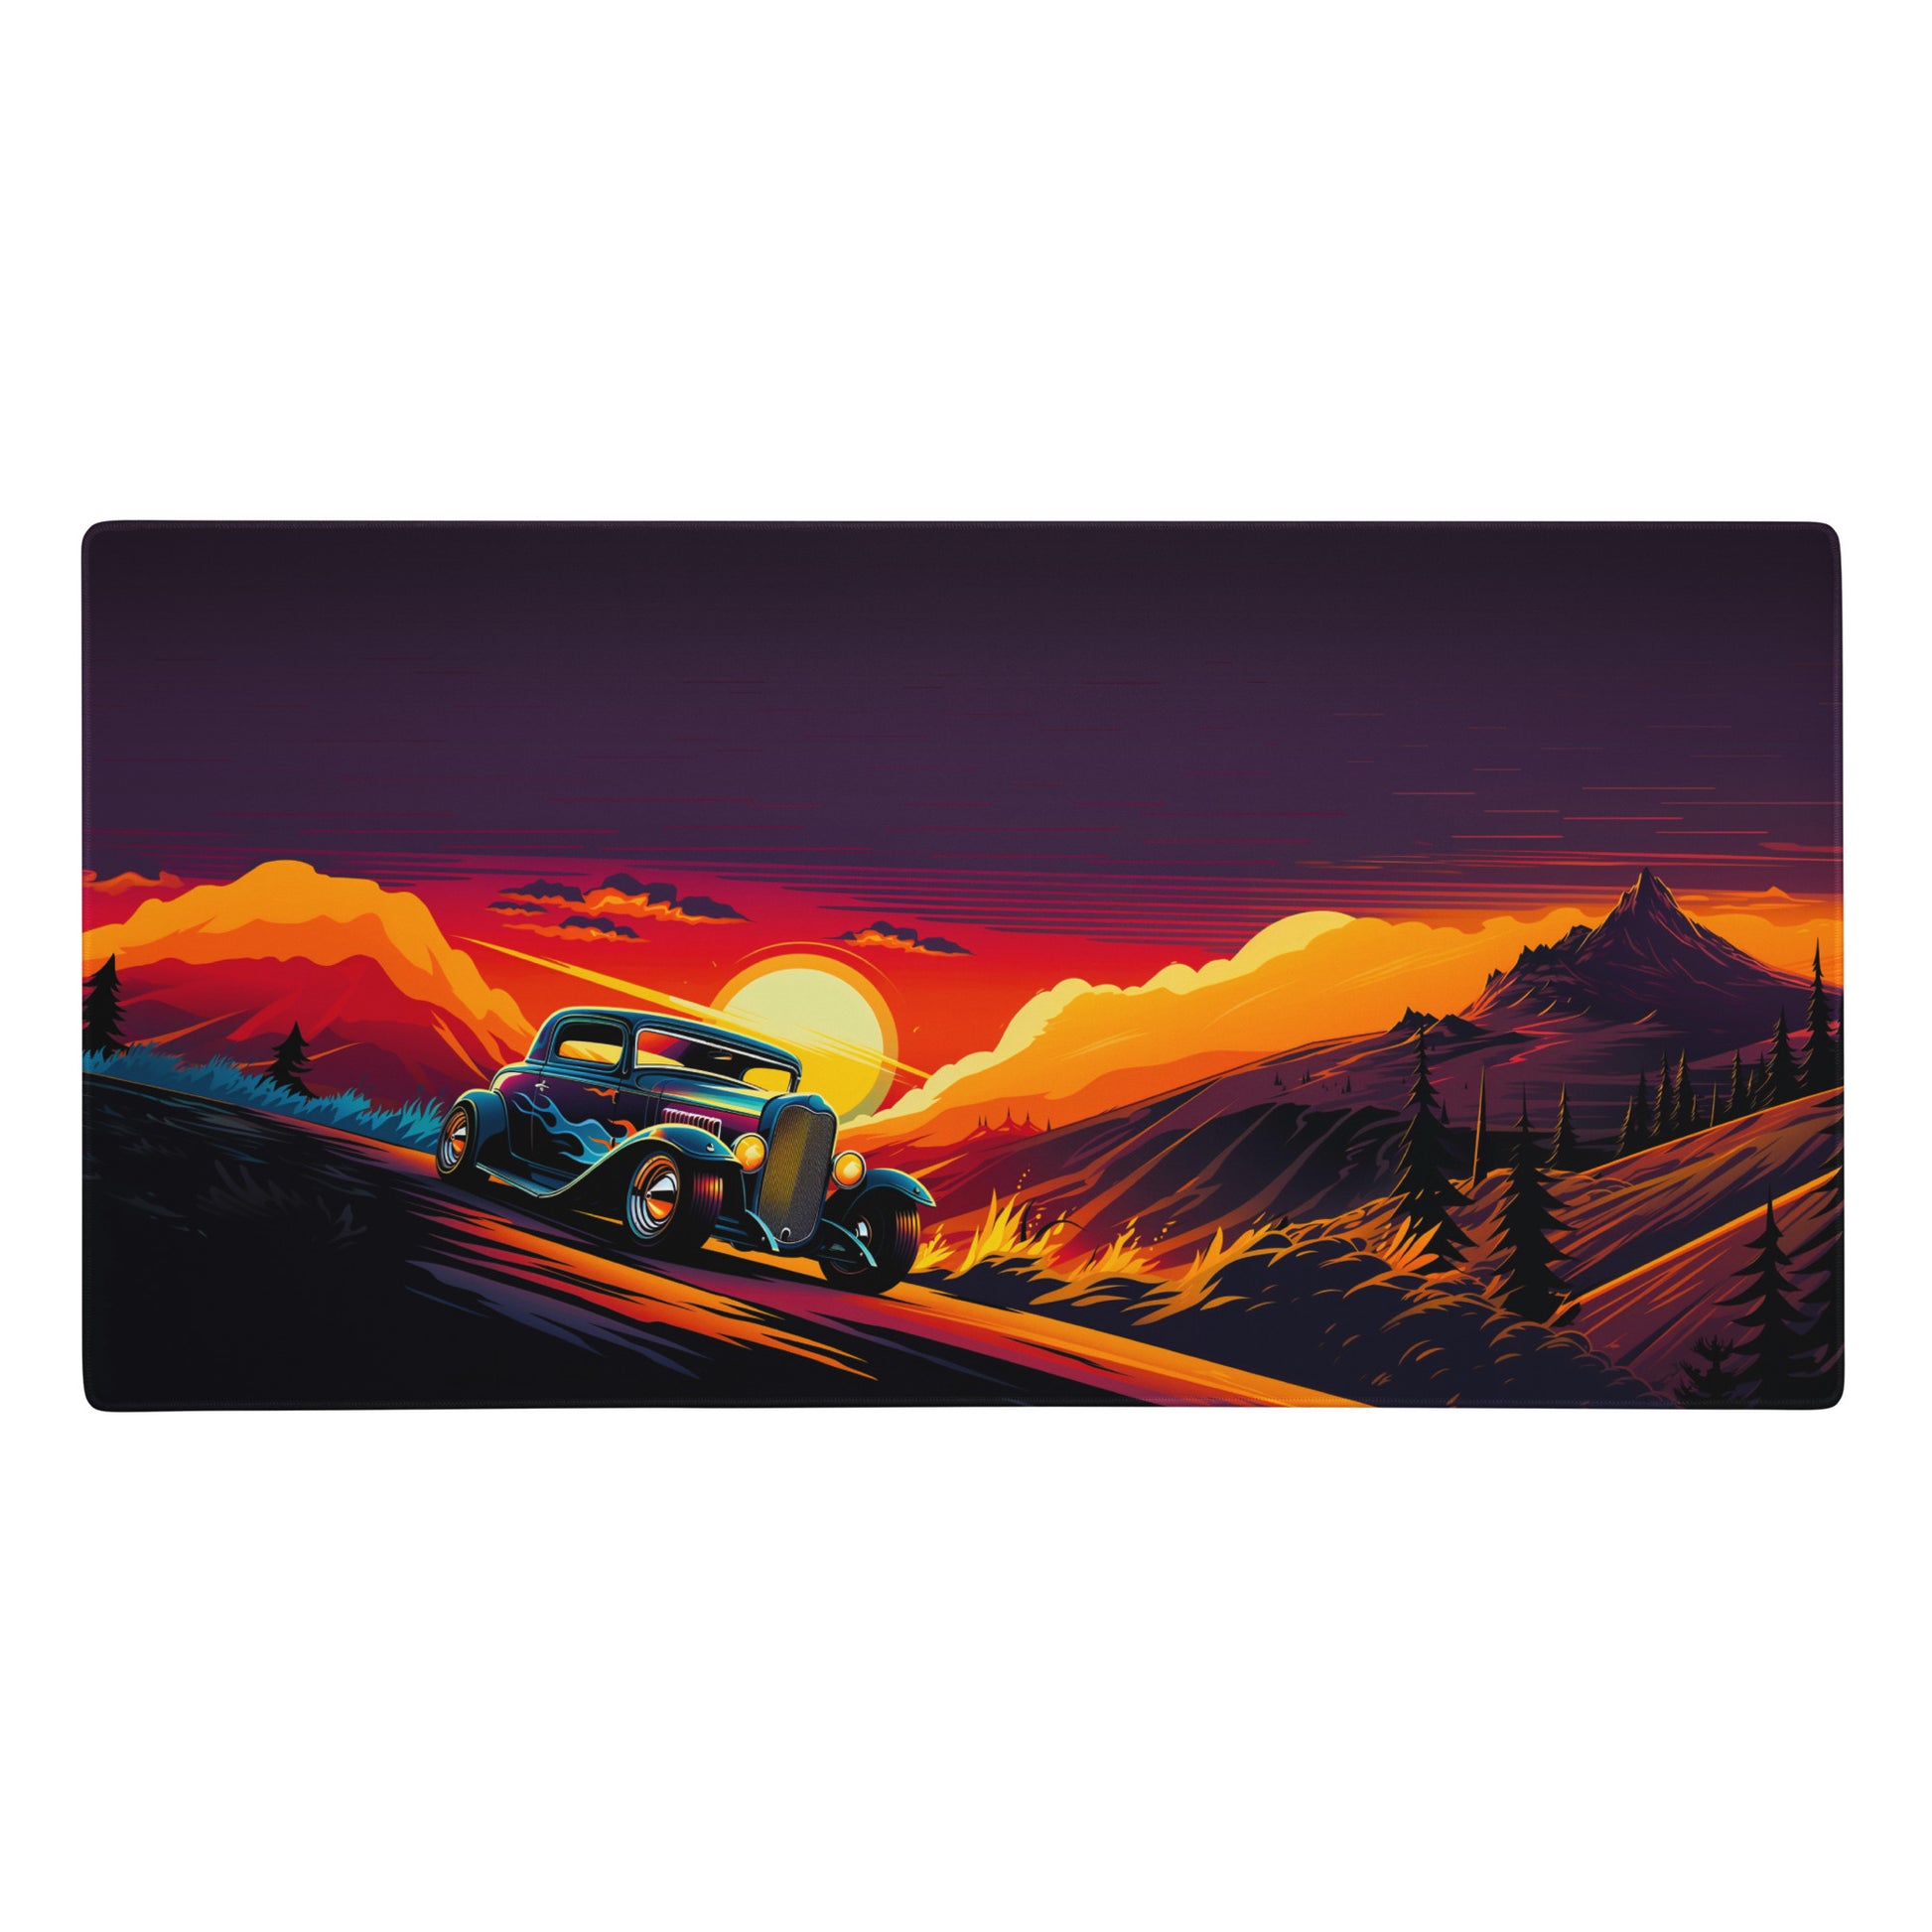 A 36" x 18" gaming desk pad with an old hot rod racing down a road with mountains in the background. Purple and Orange in color. 